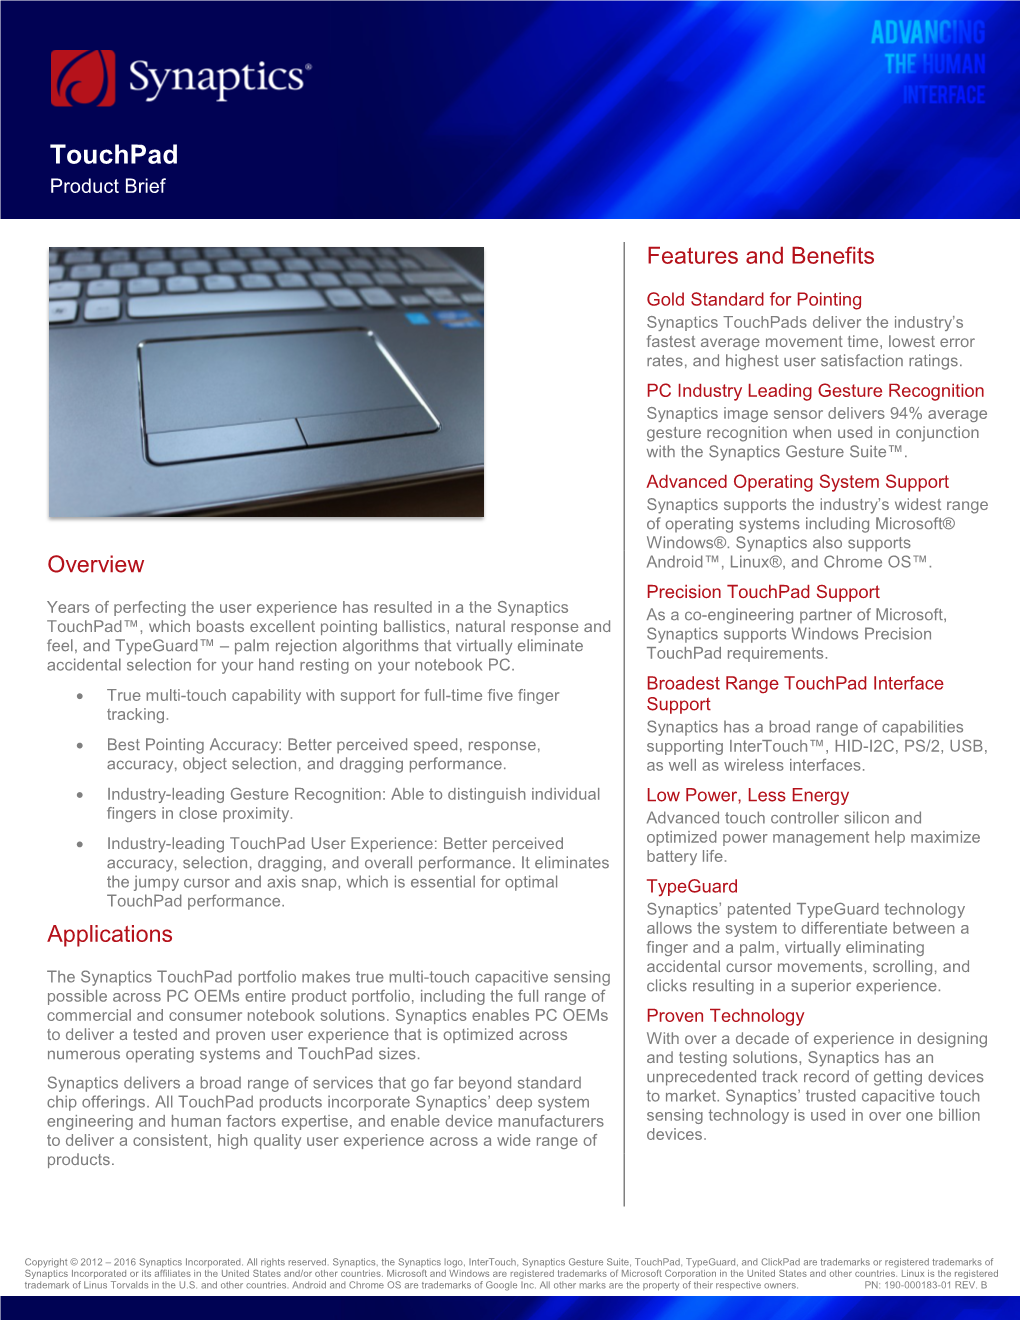 Touchpad Product Brief | Synaptics